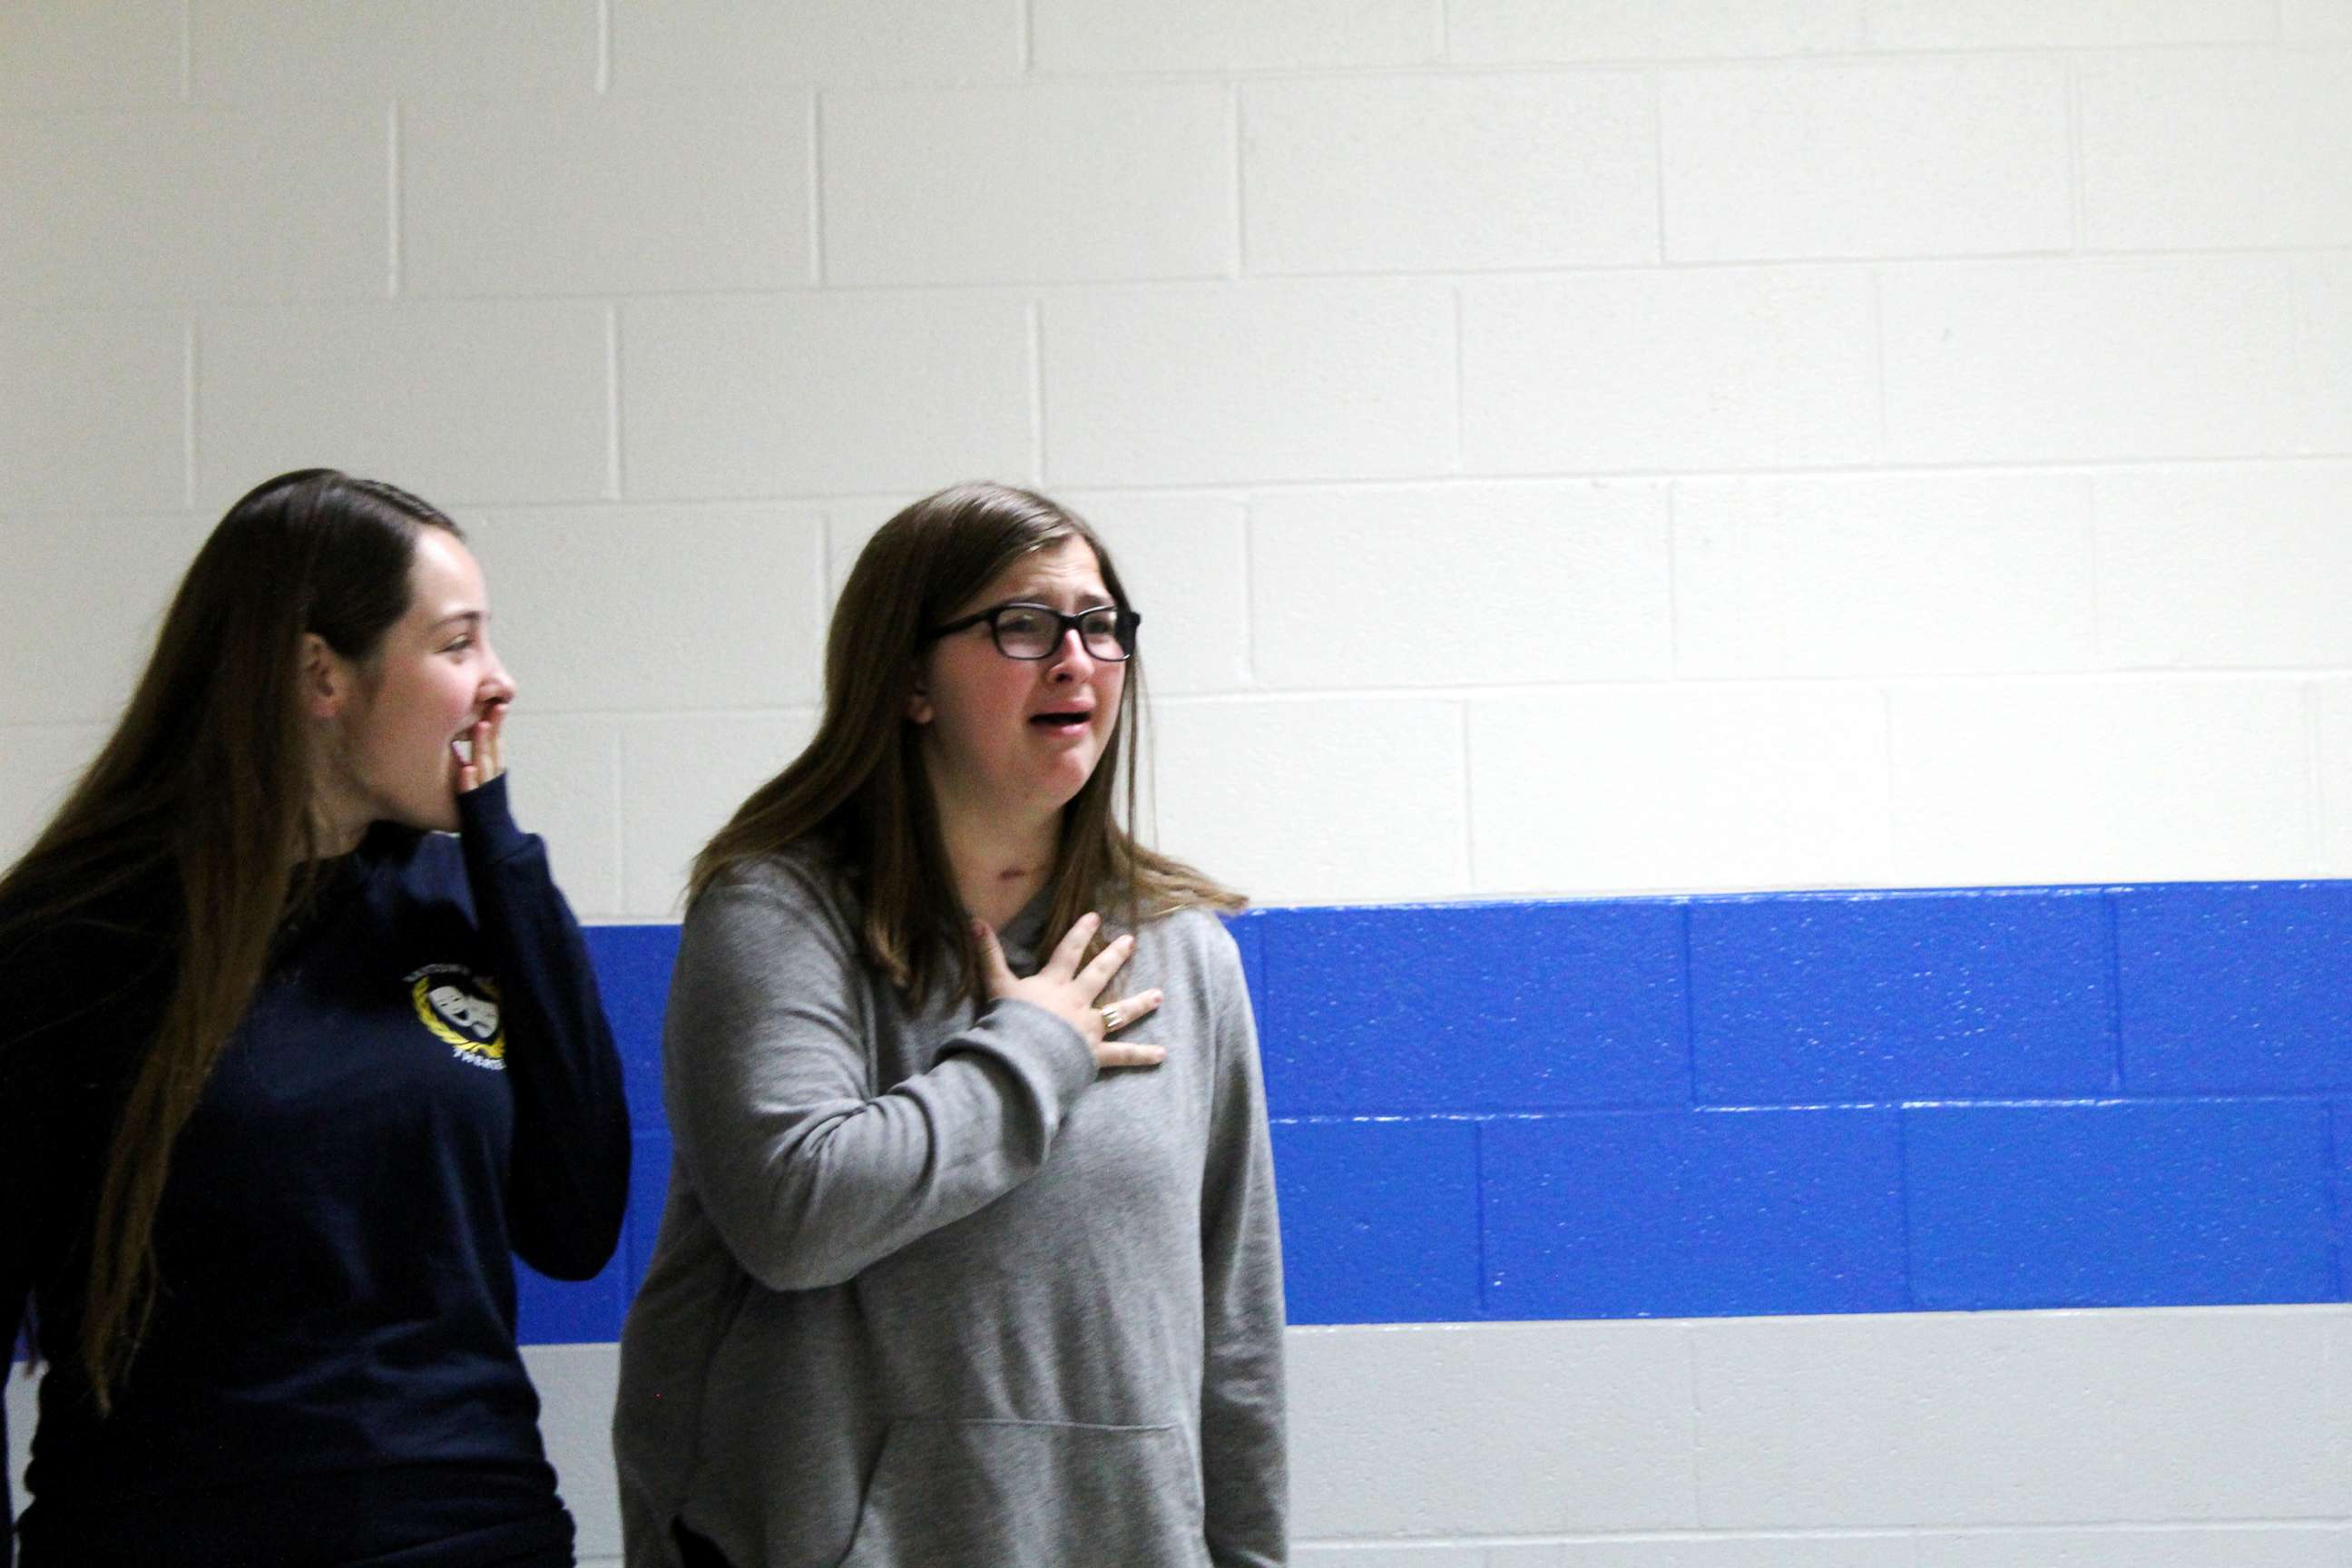 PHOTO: Emily Sadler, 15, was surprised by her classmates on Nov. 16 with news that she was cancer free.